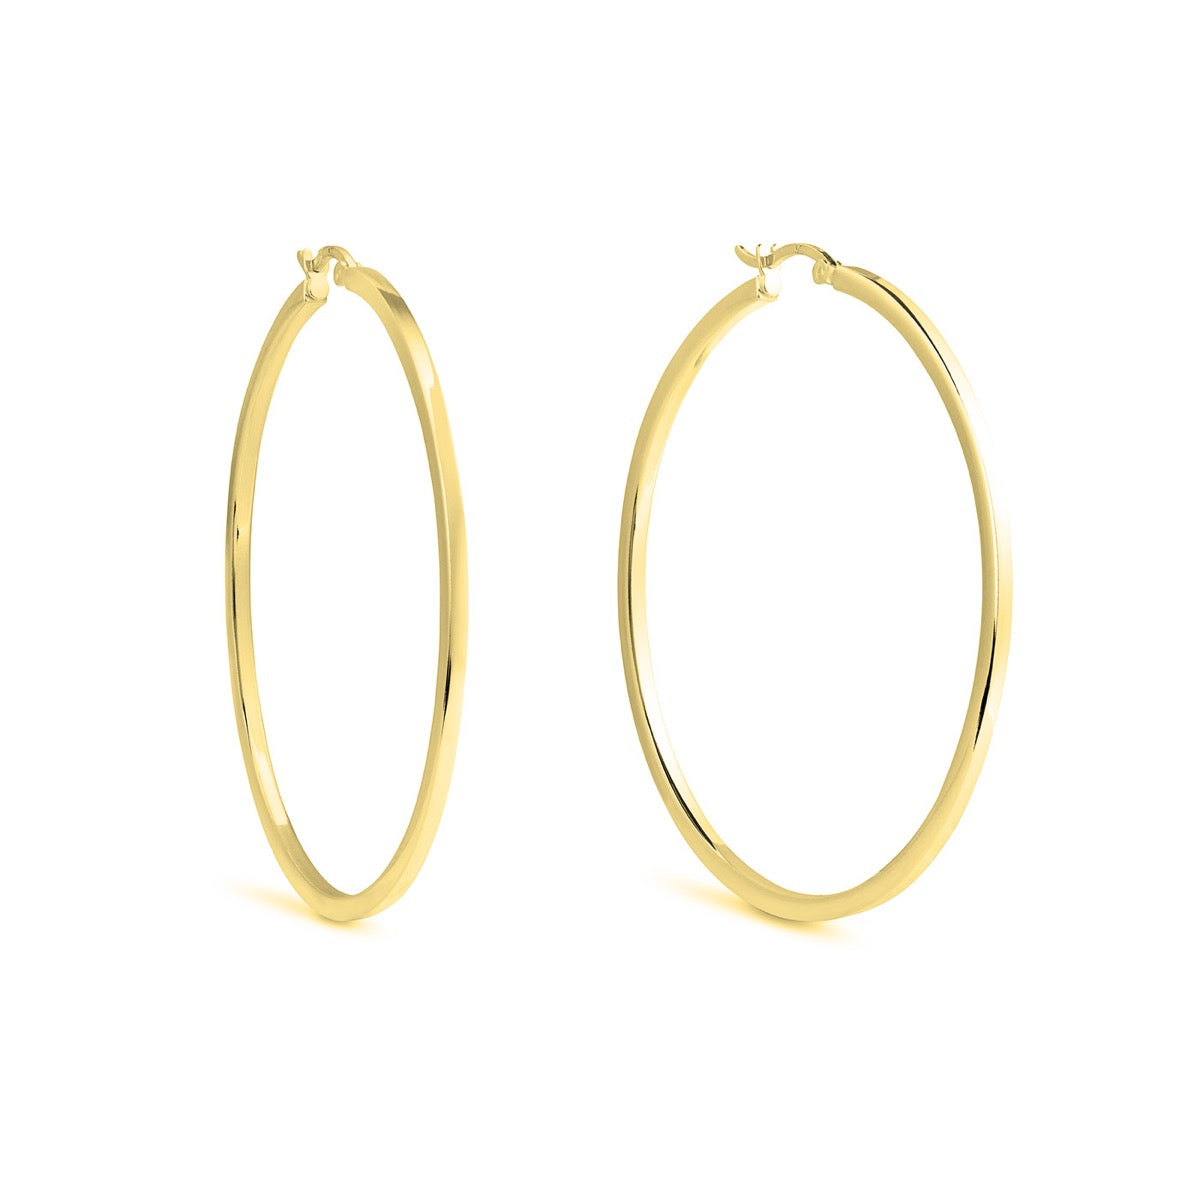 Sterling Silver and 22ct Gold Plated Square Edged Hoops - Medium